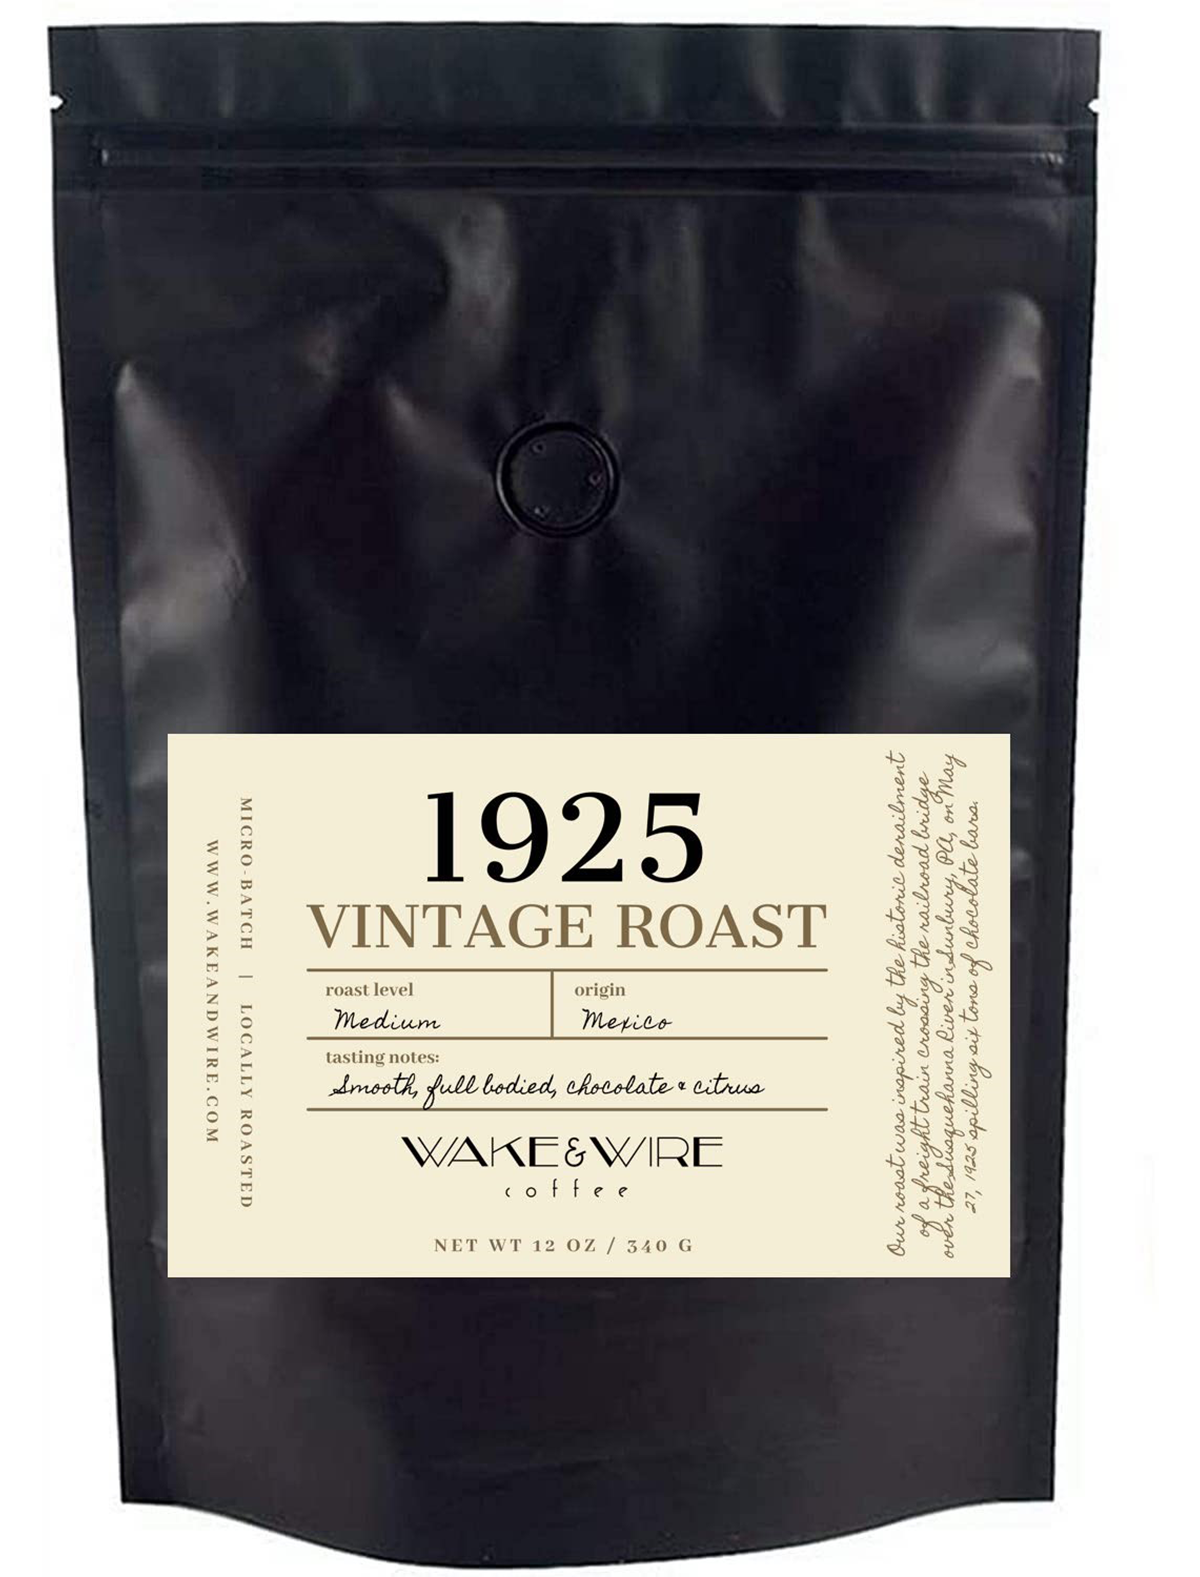 Fresh Roasted Wake and Wire's 1925 Vintage Roast edit29_5d5d7231-5e00-4f8f-b6ce-cdd1d8491570